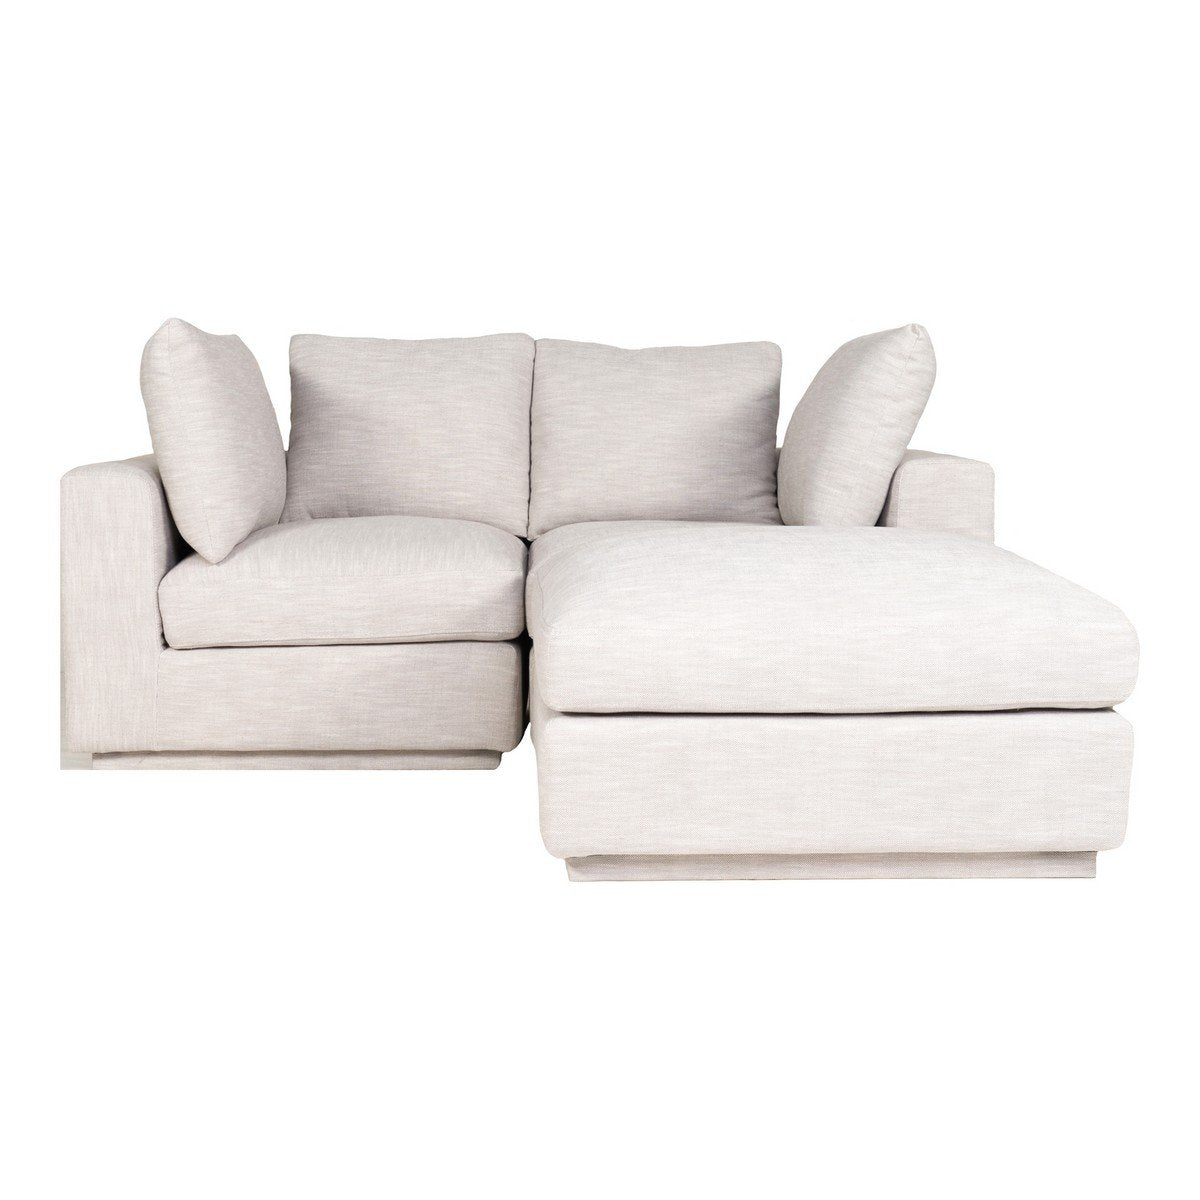 Moe's Home Collection Justin Nook Modular Sectional Taupe - RN-1132-39 - Moe's Home Collection - Extras - Minimal And Modern - 1